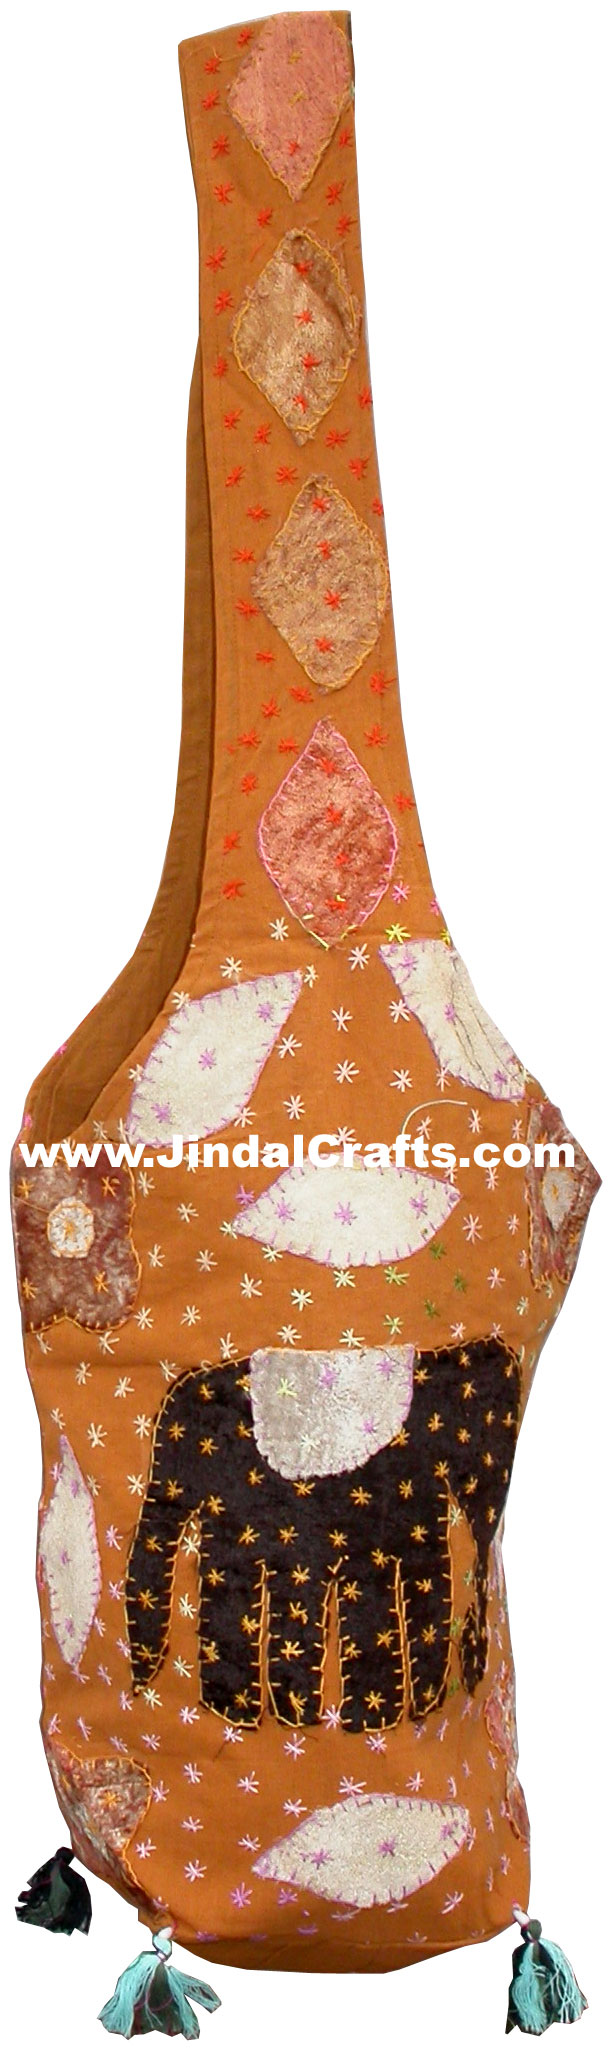 Colourful Hand Embroidered Elephant Handbag from India 100 % Cotton Fabric Art